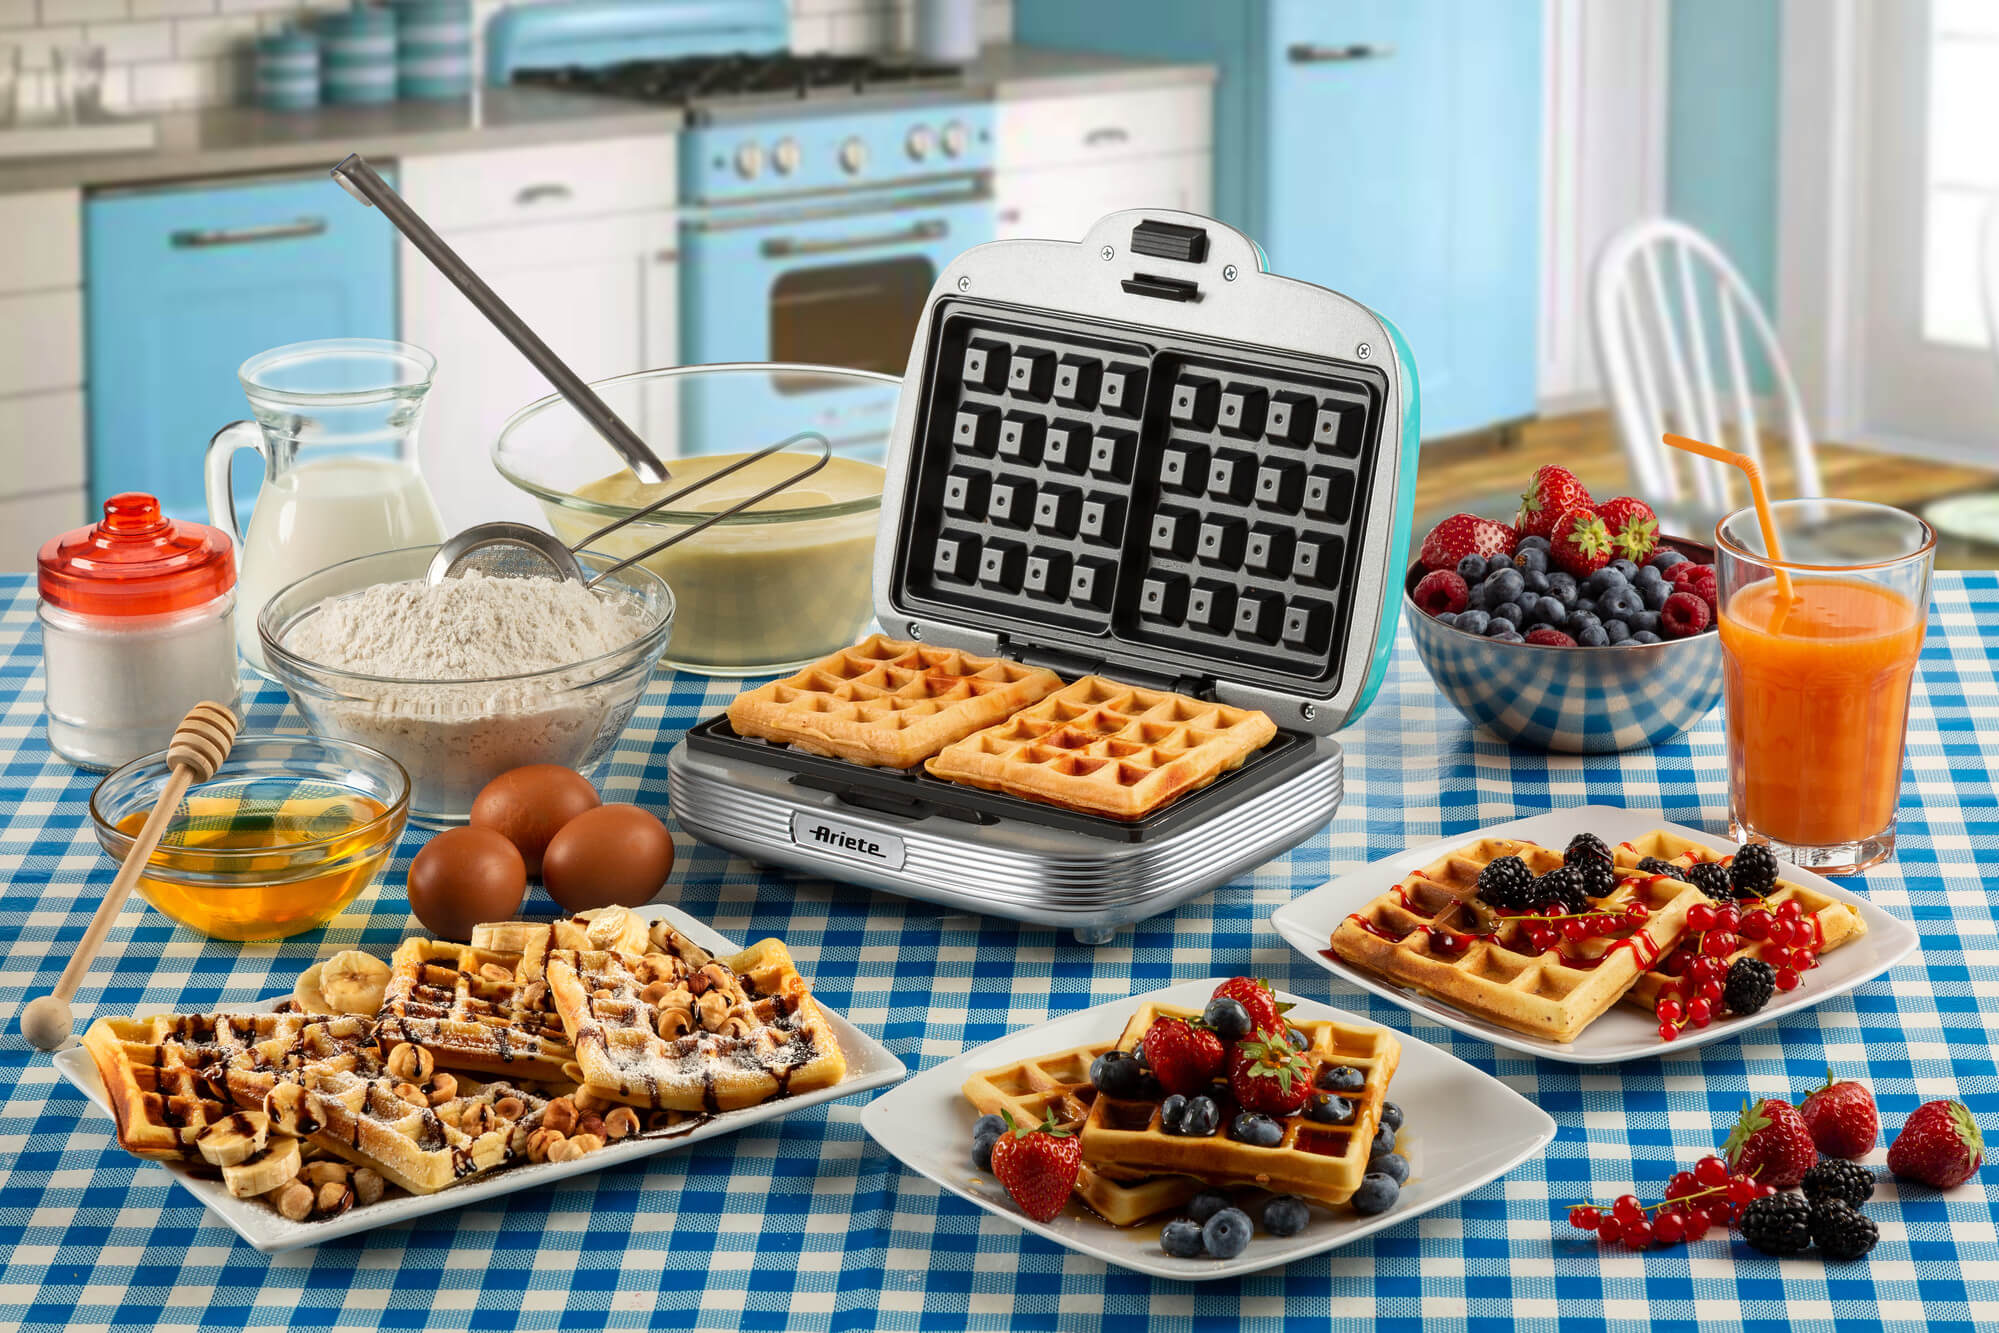 ariete 1973 waffle party time azzurro